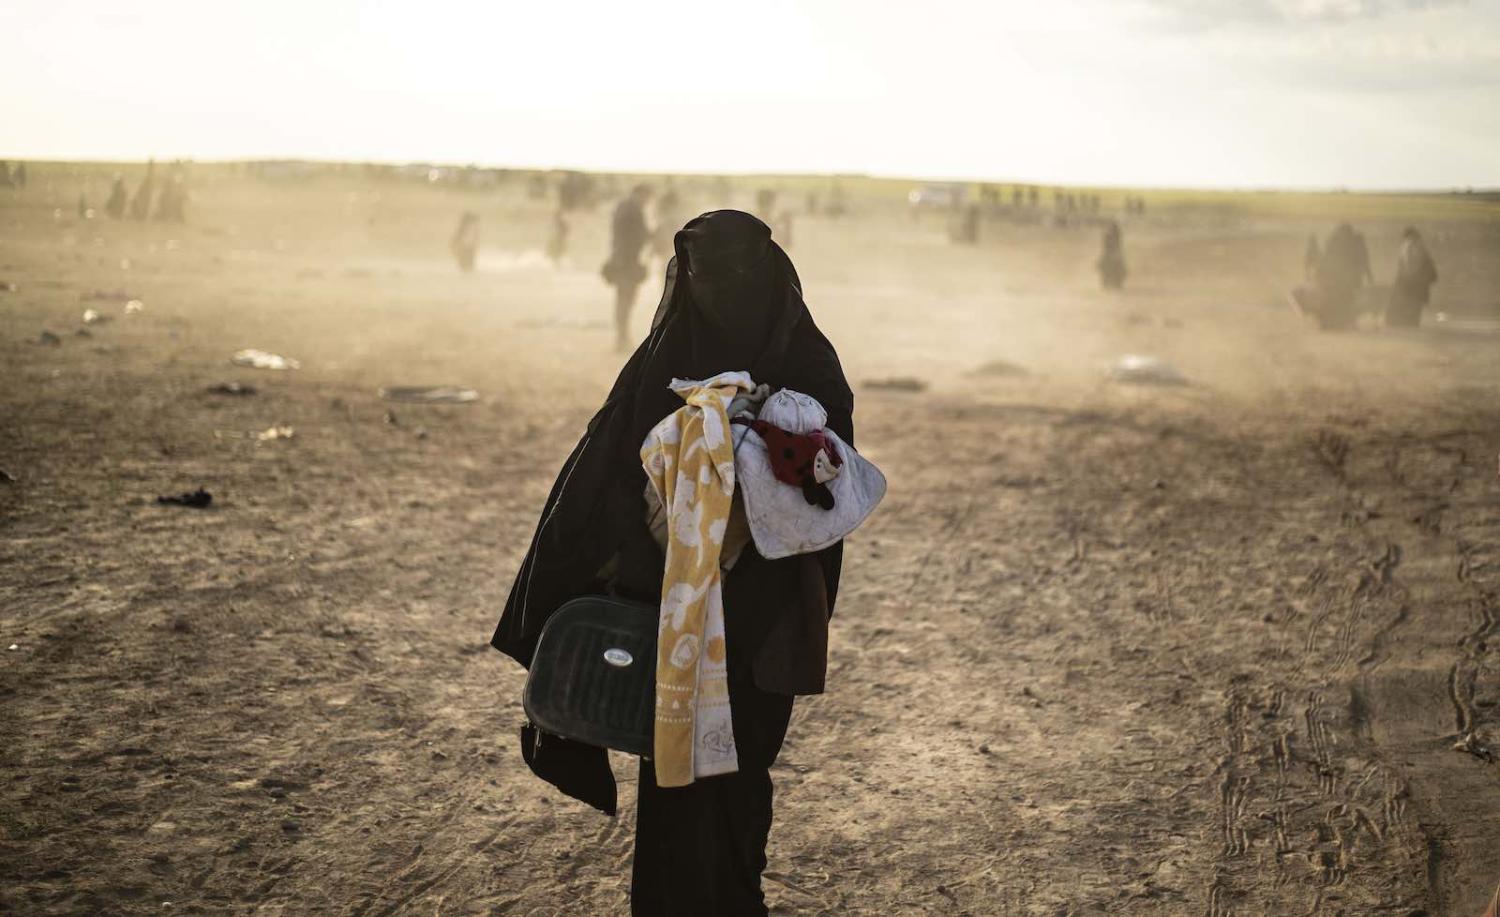 A woman evacuated from the Islamic State’s holdout of Baghouz arrives at a screening area held by Kurdish-led Syrian Democratic Forces, Deir Ezzor province, Syria, March 2019. (Photo: Delil Souleiman/AFP/Getty Images)